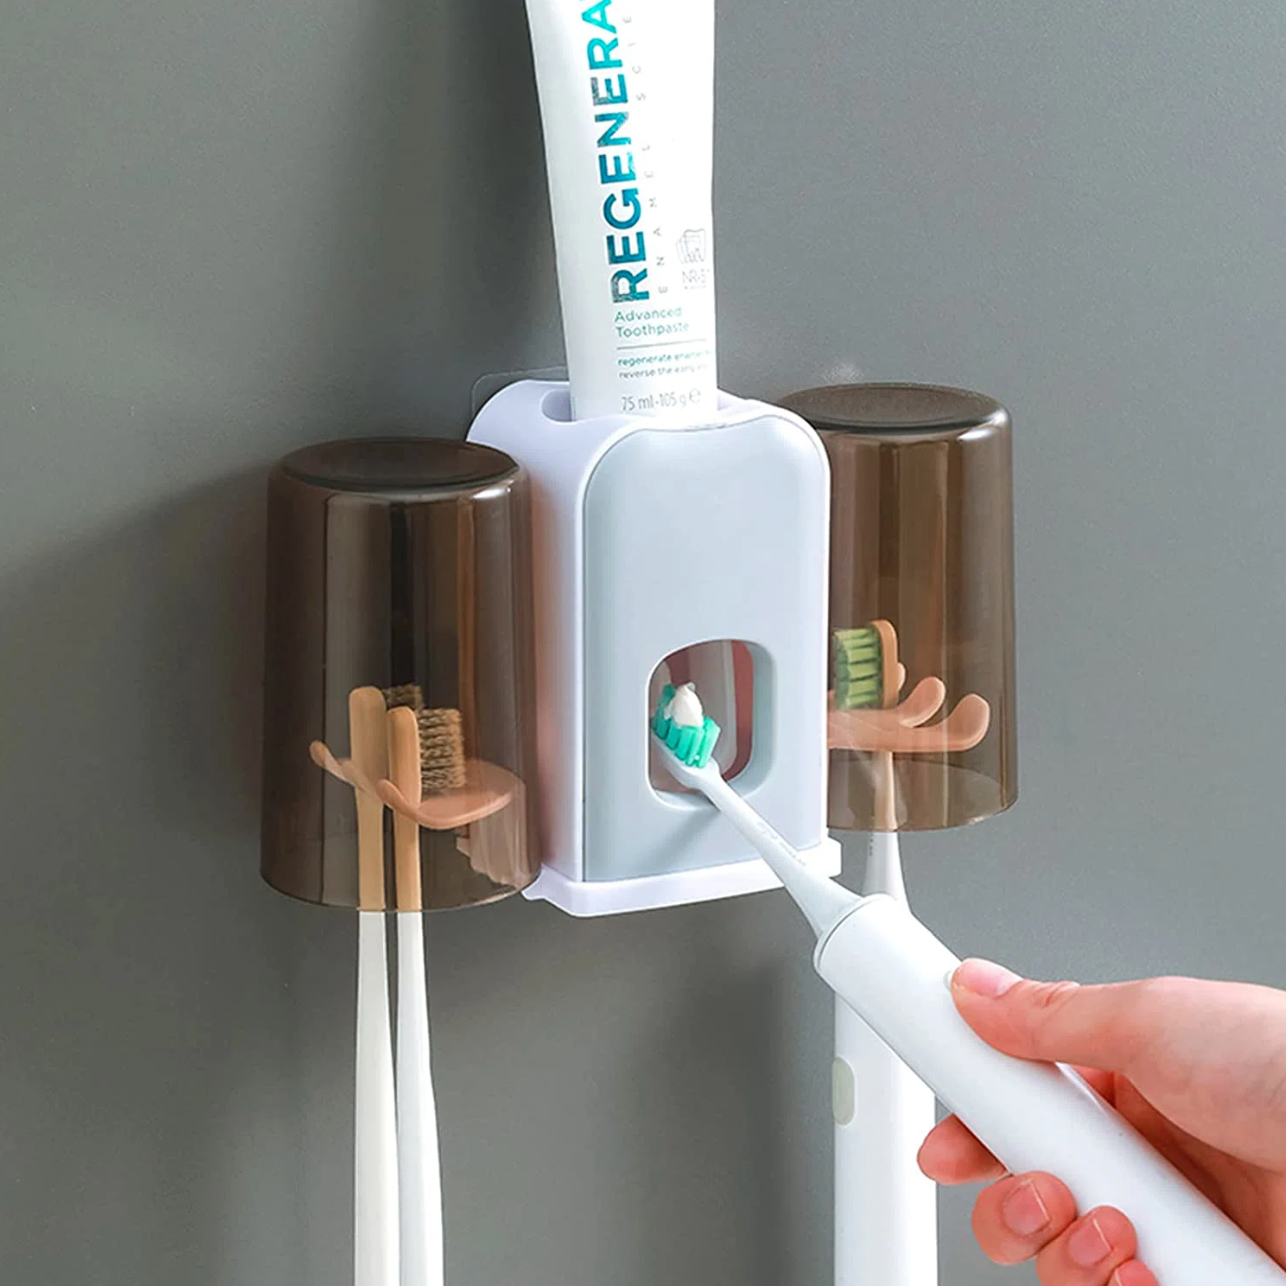 a toothbrush holder with an automatic dispenser for toothpaste